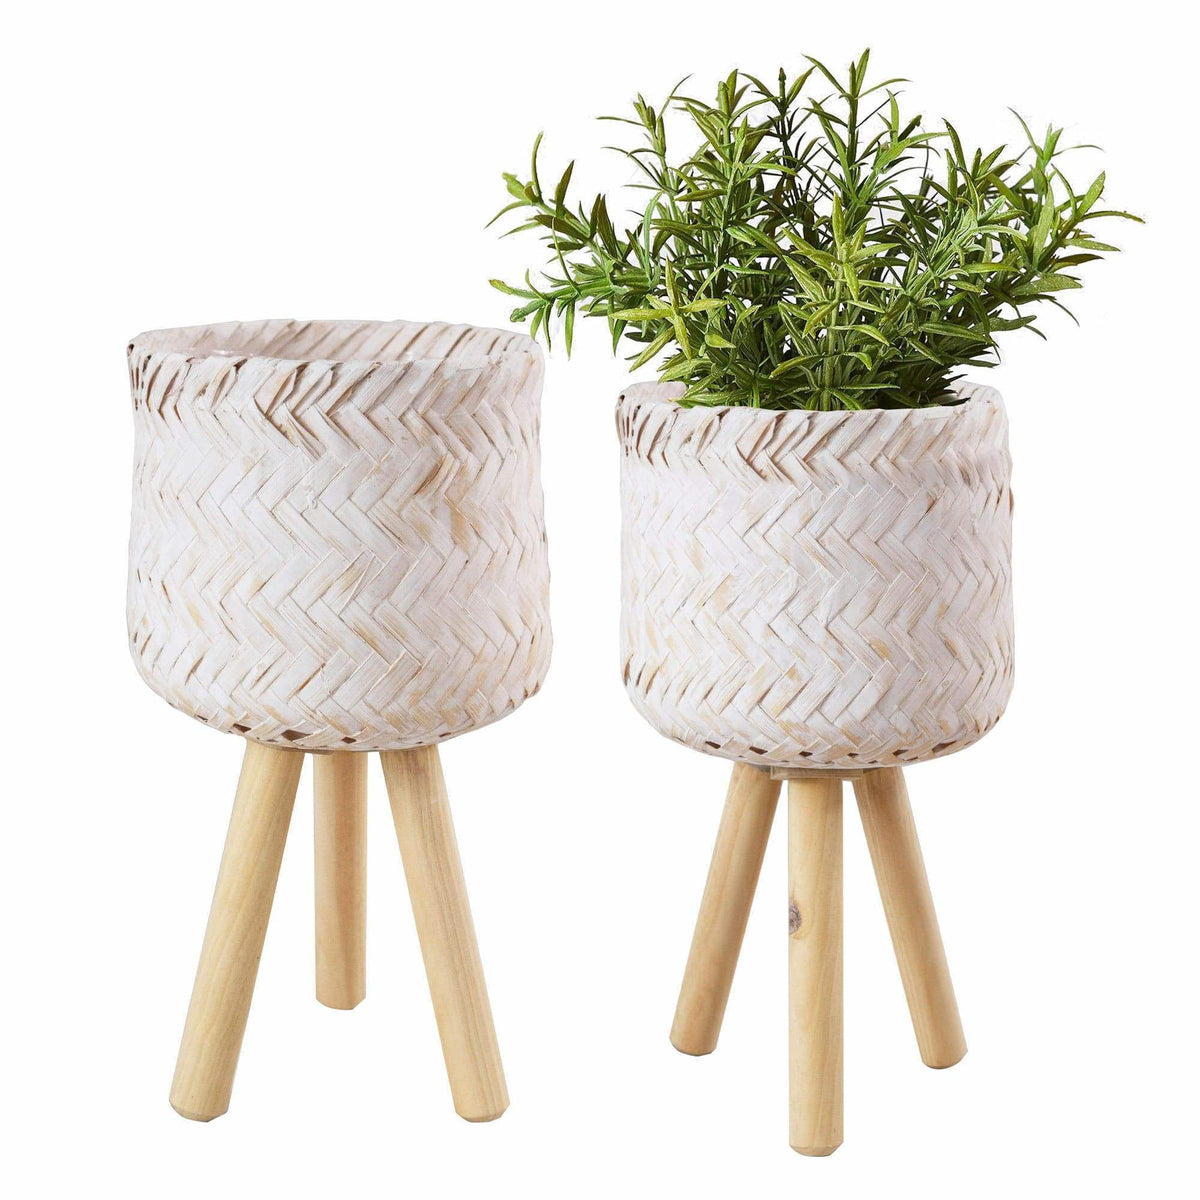 Wicker Planter Basket w Removable Legs for Indoor and Outdoor - All Weather Woven Flower Pots Cover